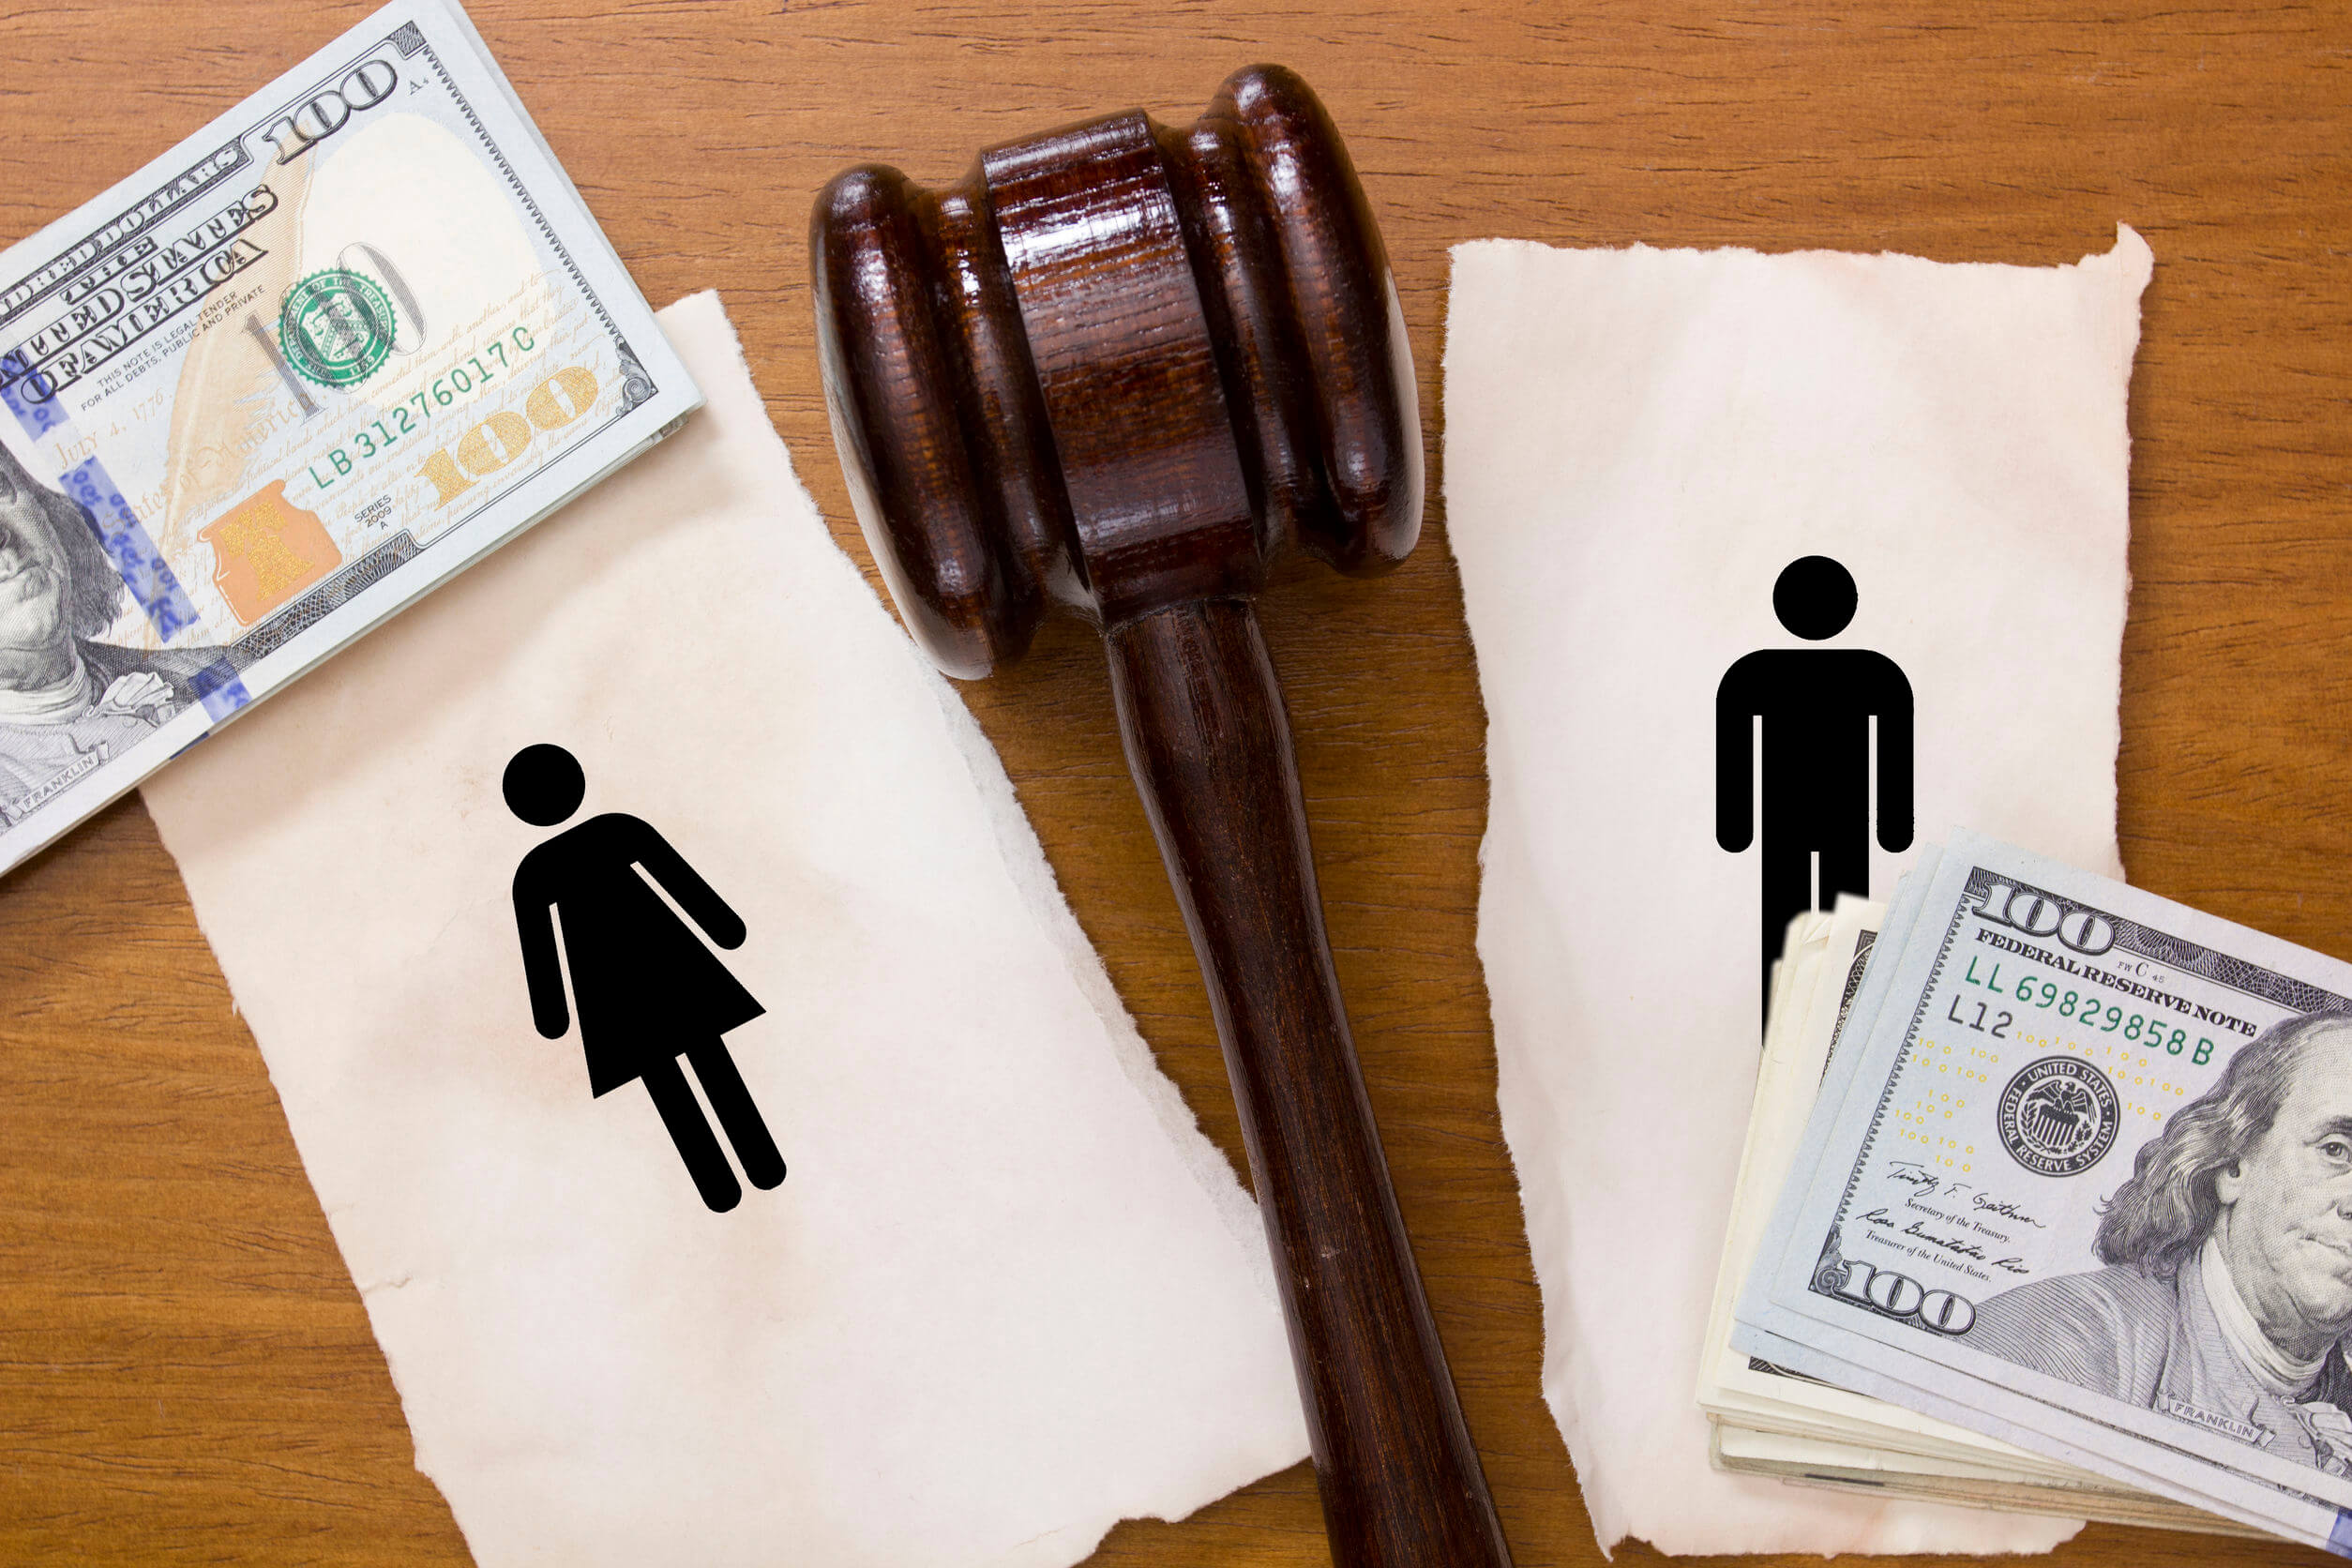 Division of Debt and Assets during Divorce get more complex when a lot of money is involved. We handle many complex divorce cases in Marietta and surrounding cities